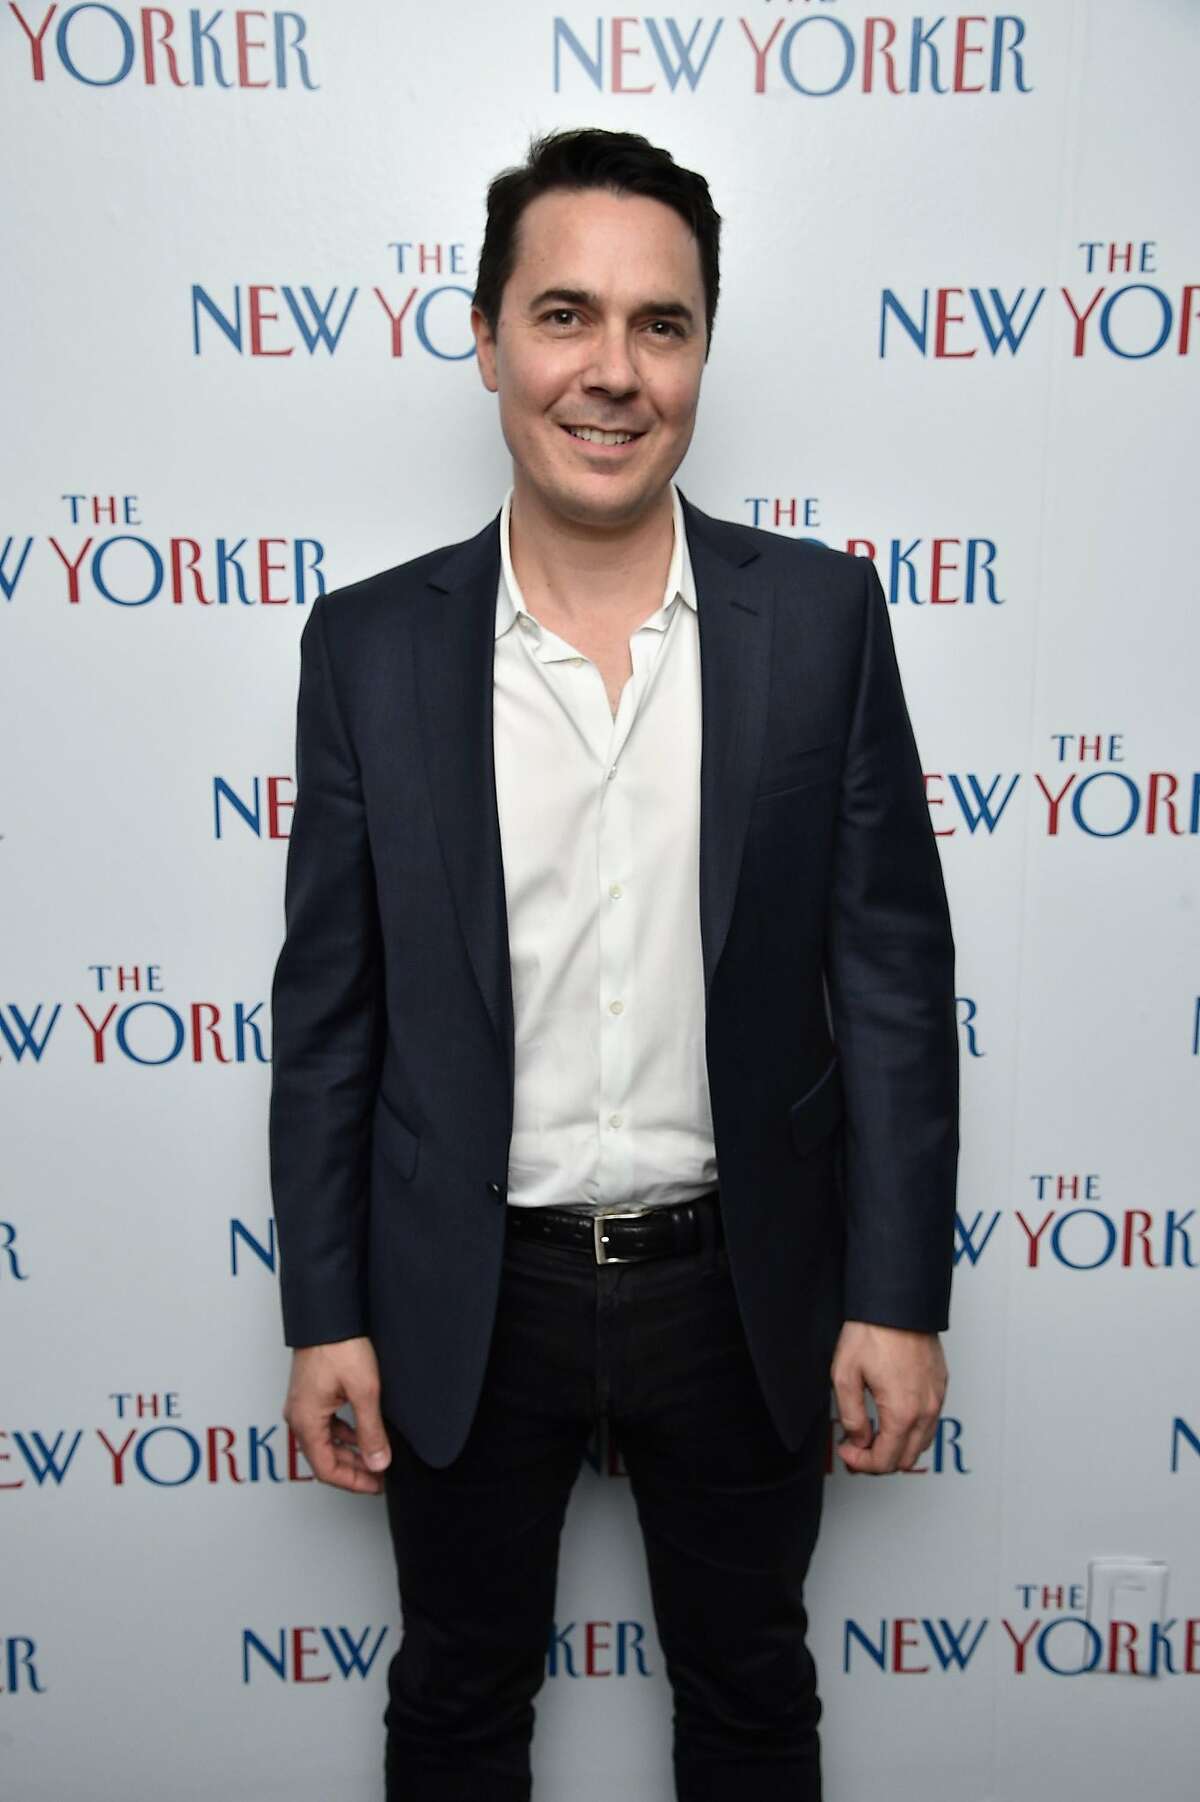 WASHINGTON, DC - APRIL 29: Washington correspondent for The New Yorker Ryan Lizza attends The New Yorker's annual party kicking off The White House Correspondents' Association Dinner Weekend hosted by David Remnick at W Hotel Rooftop on April 29, 2016 in Washington, DC. (Photo by Dimitrios Kambouris/Getty Images for The New Yorker)